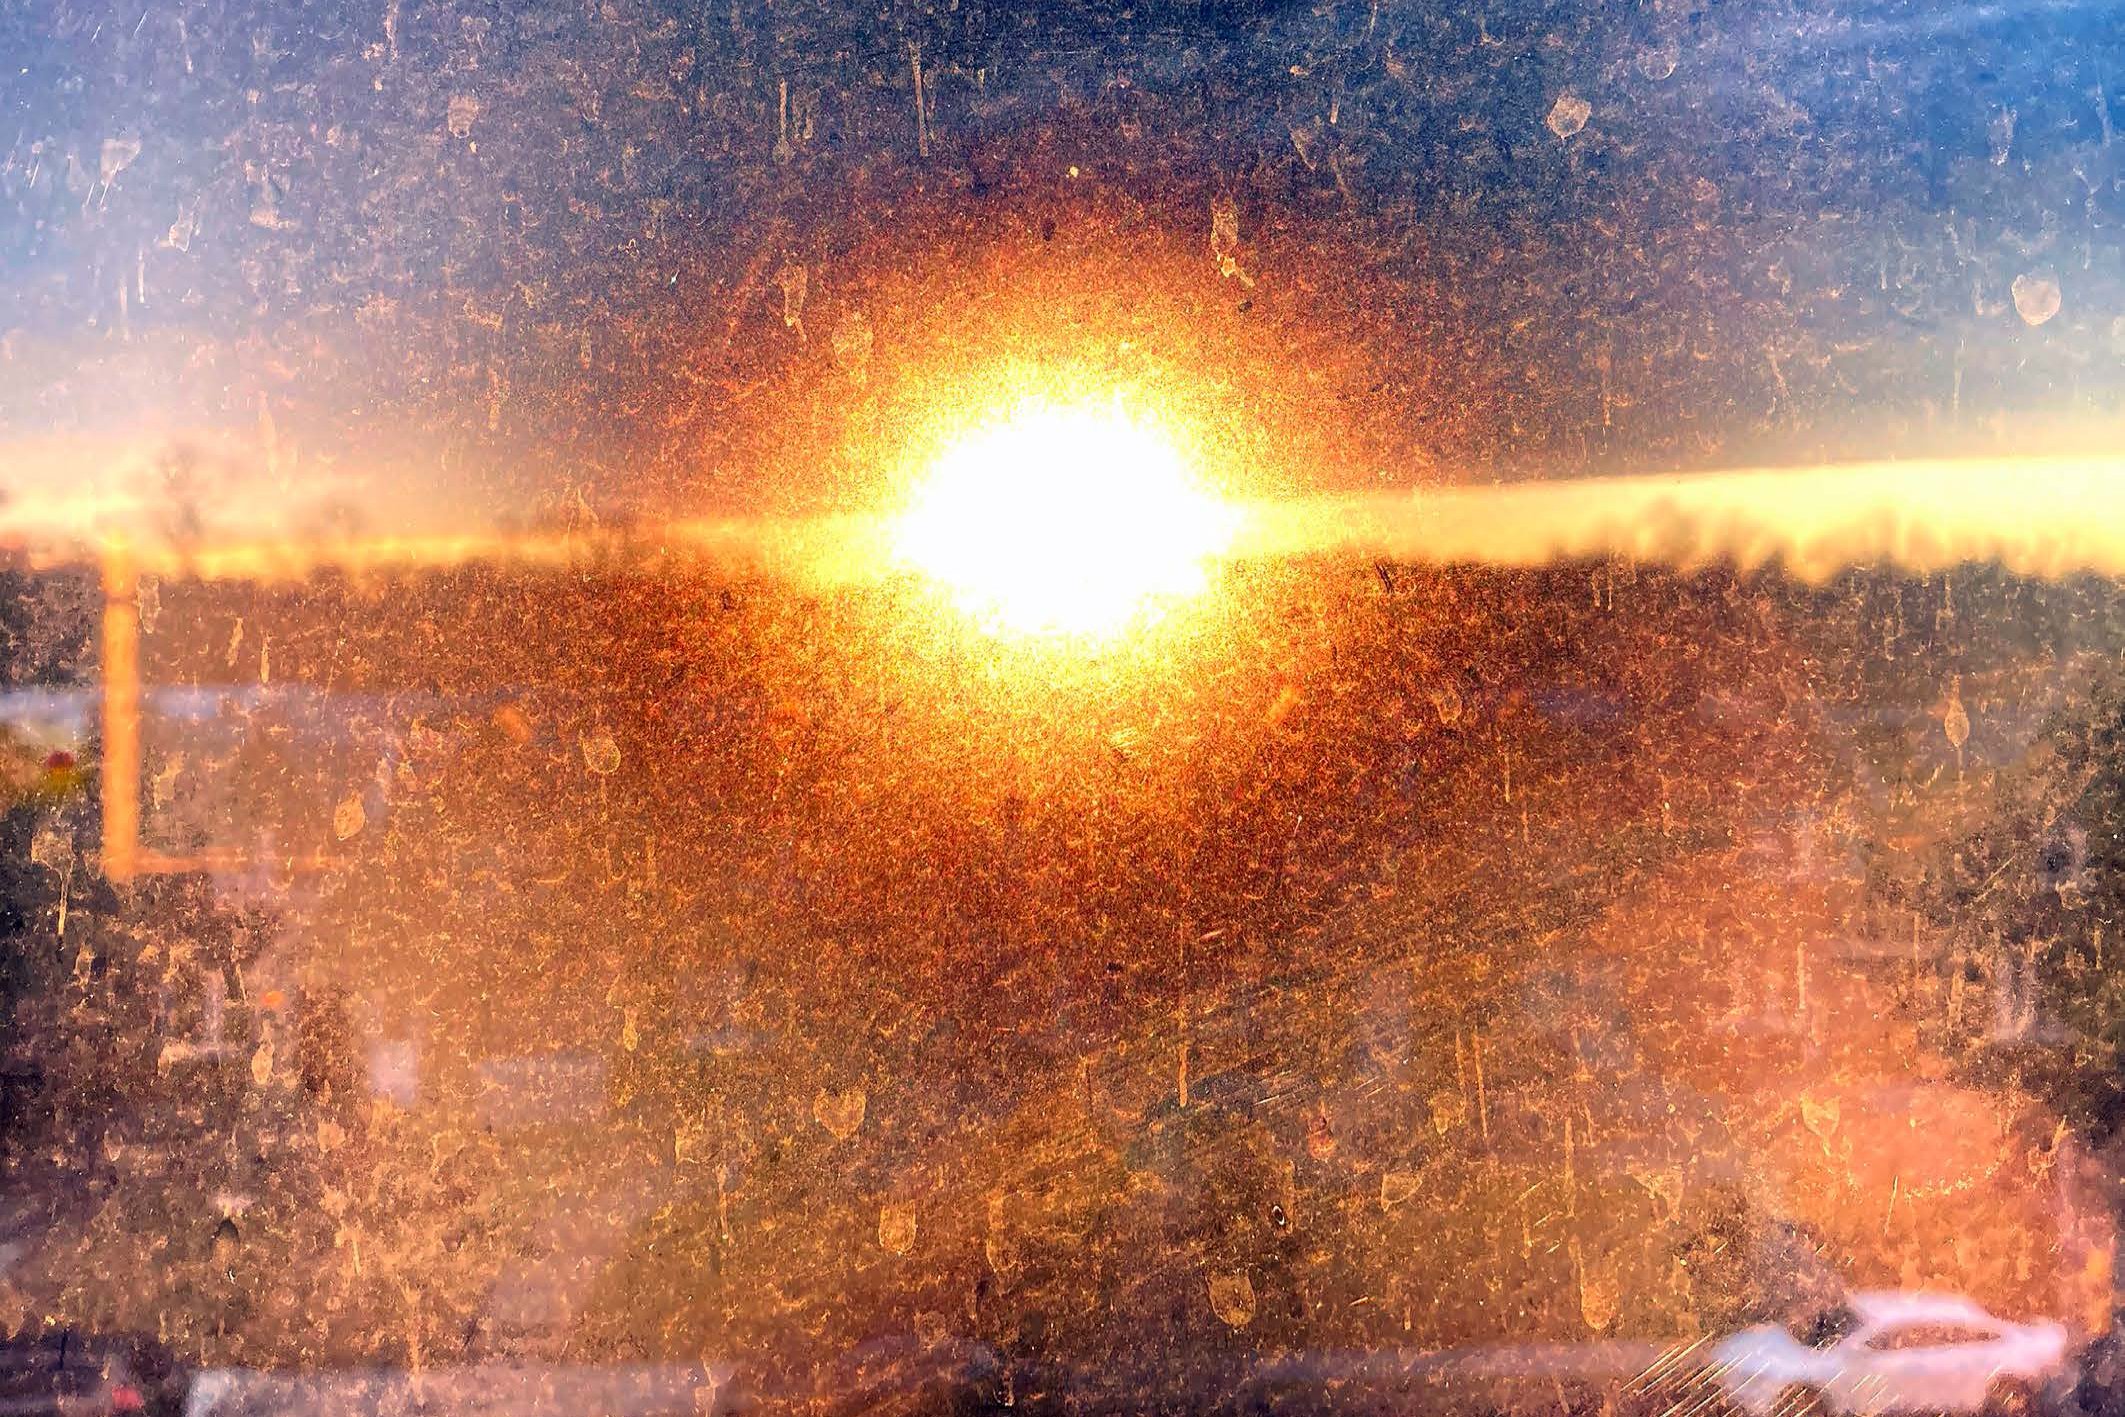  Commencement Detail, Photograph (Sunset), 2021  pigment print  12 x 18 inches image on 16 x 20 inches paper 